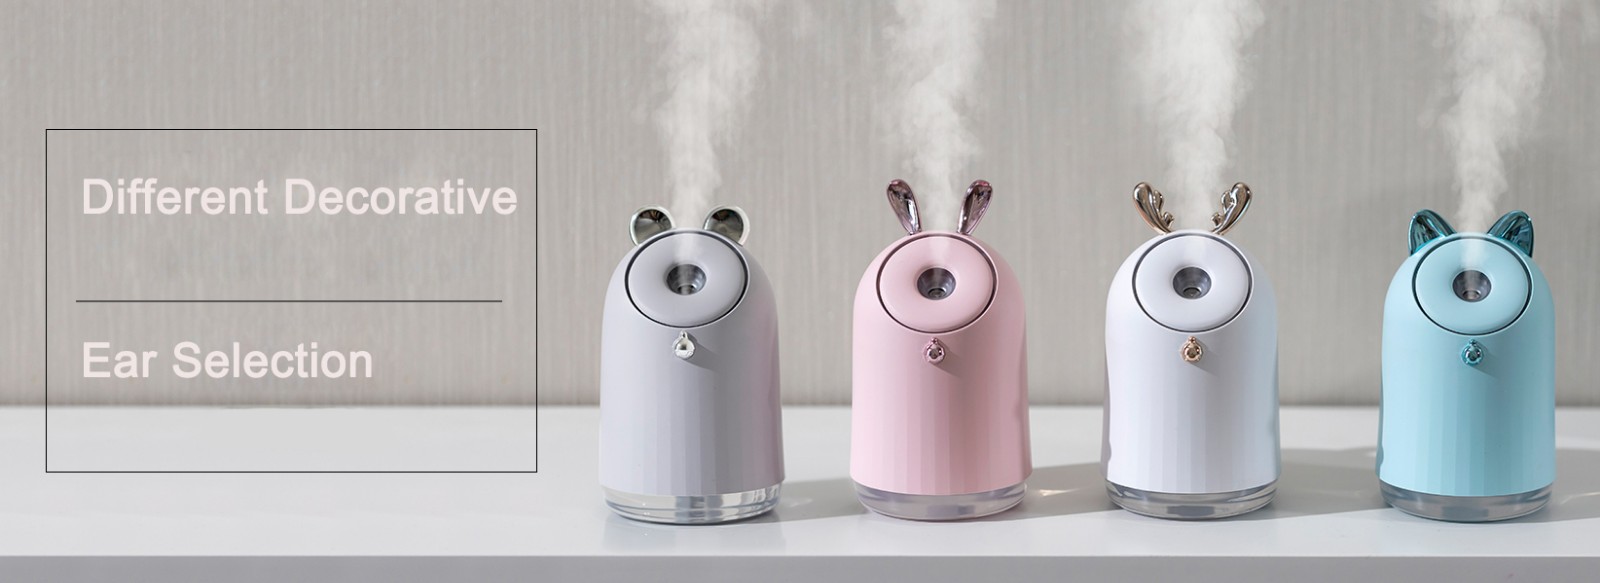 Pengwing-Oem Odm Mini Usb Humidifier, The Best Air Humidifier | Pengwing